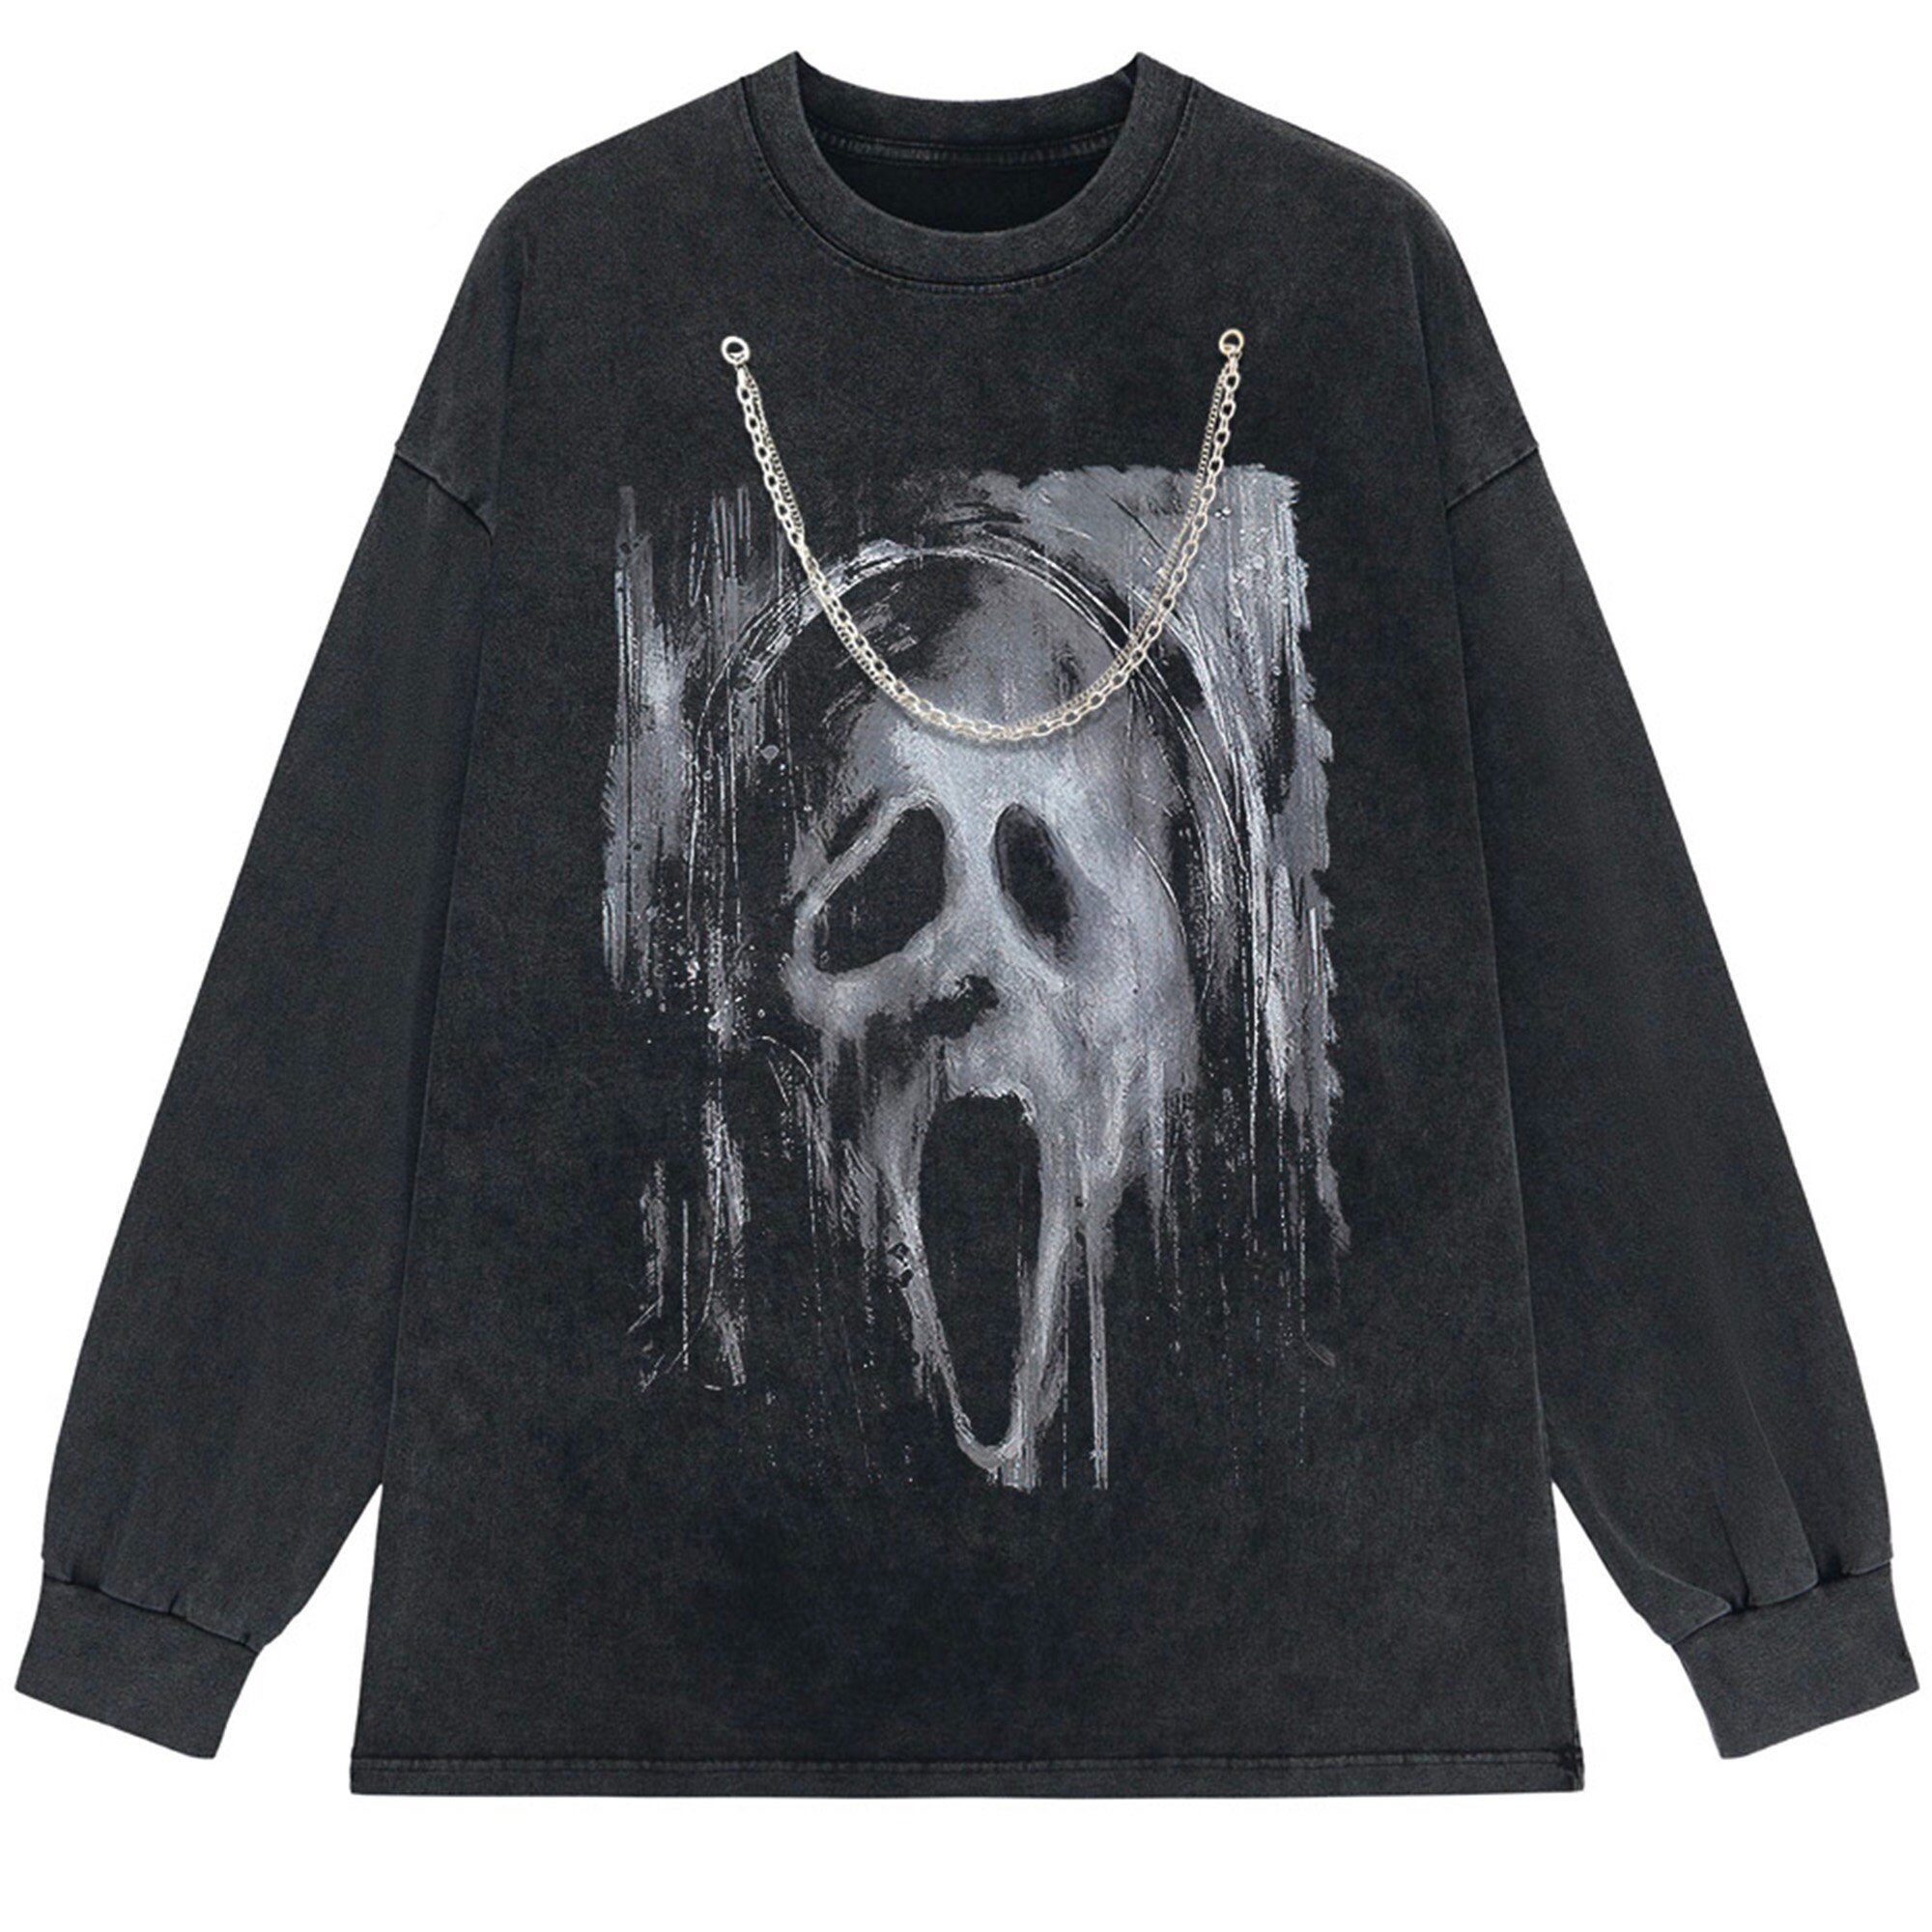 Discover Scream horror ghost face tshirt | 90s Grunge gothic shirt | Black washed shirt with skull white print